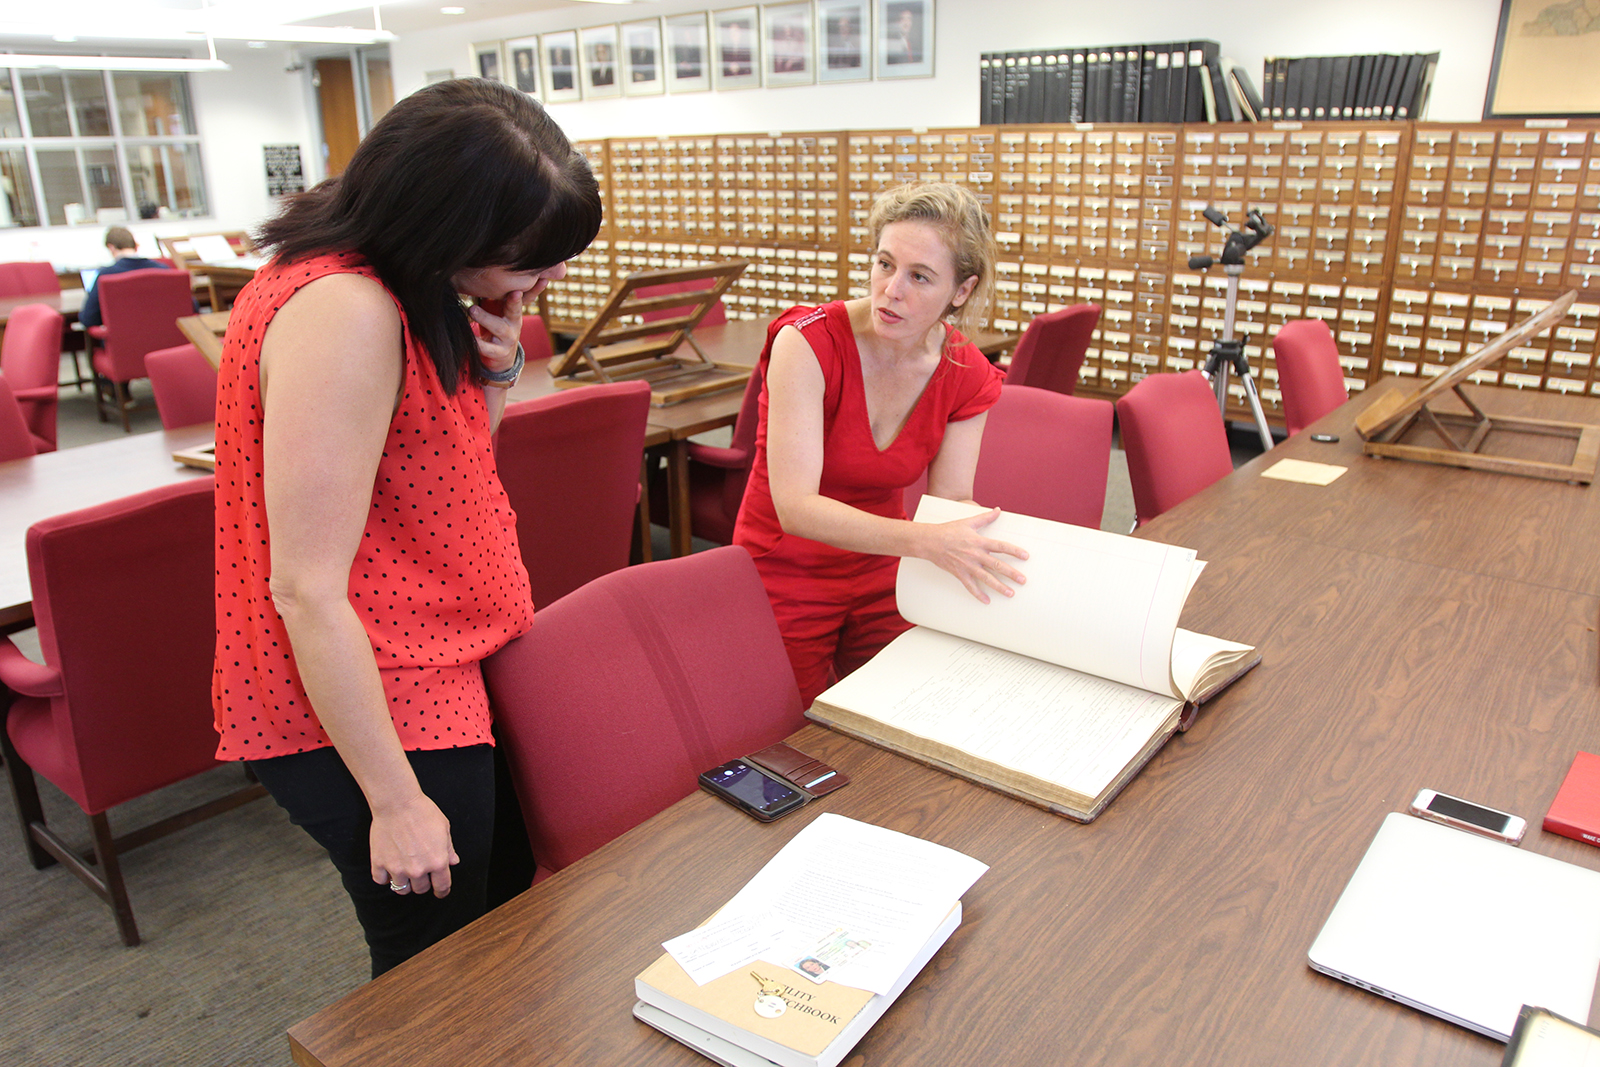 From left, Sarah Almond and Tift Merritt working in the State Archive Reading Room. (photo by Will Bosley)